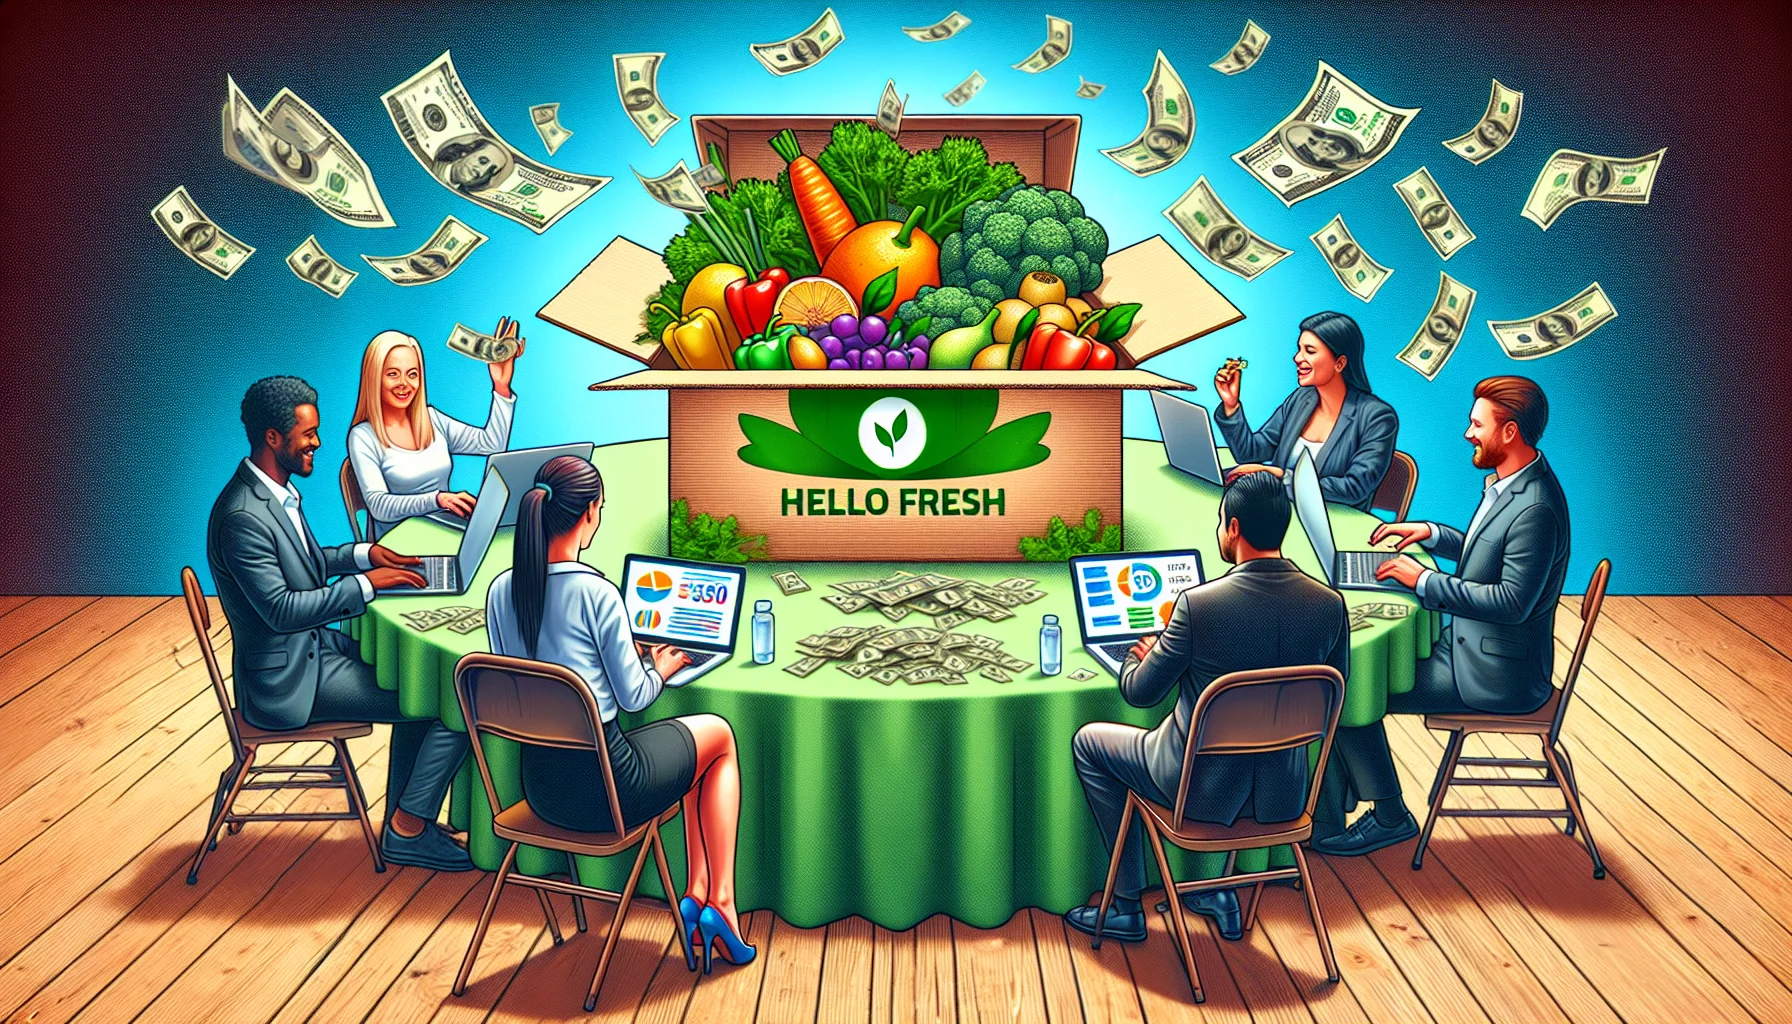 Craft an amusing yet realistic picture to represent an imaginary affiliate program similar to Hello Fresh. The scene is set in an online money-making context. It displays a diverse group of people; a Caucasian woman and a Hispanic man sitting at a round table, operating their laptops. On their screens are vibrant graphics denoting impressive earnings. In the center of the table, there's a box full of fresh ingredients with a brand logo that has a green leaf and an orange carrot. Dollar bills are playfully fluttering in the air, creating a lively atmosphere suggesting potential monetary gains.